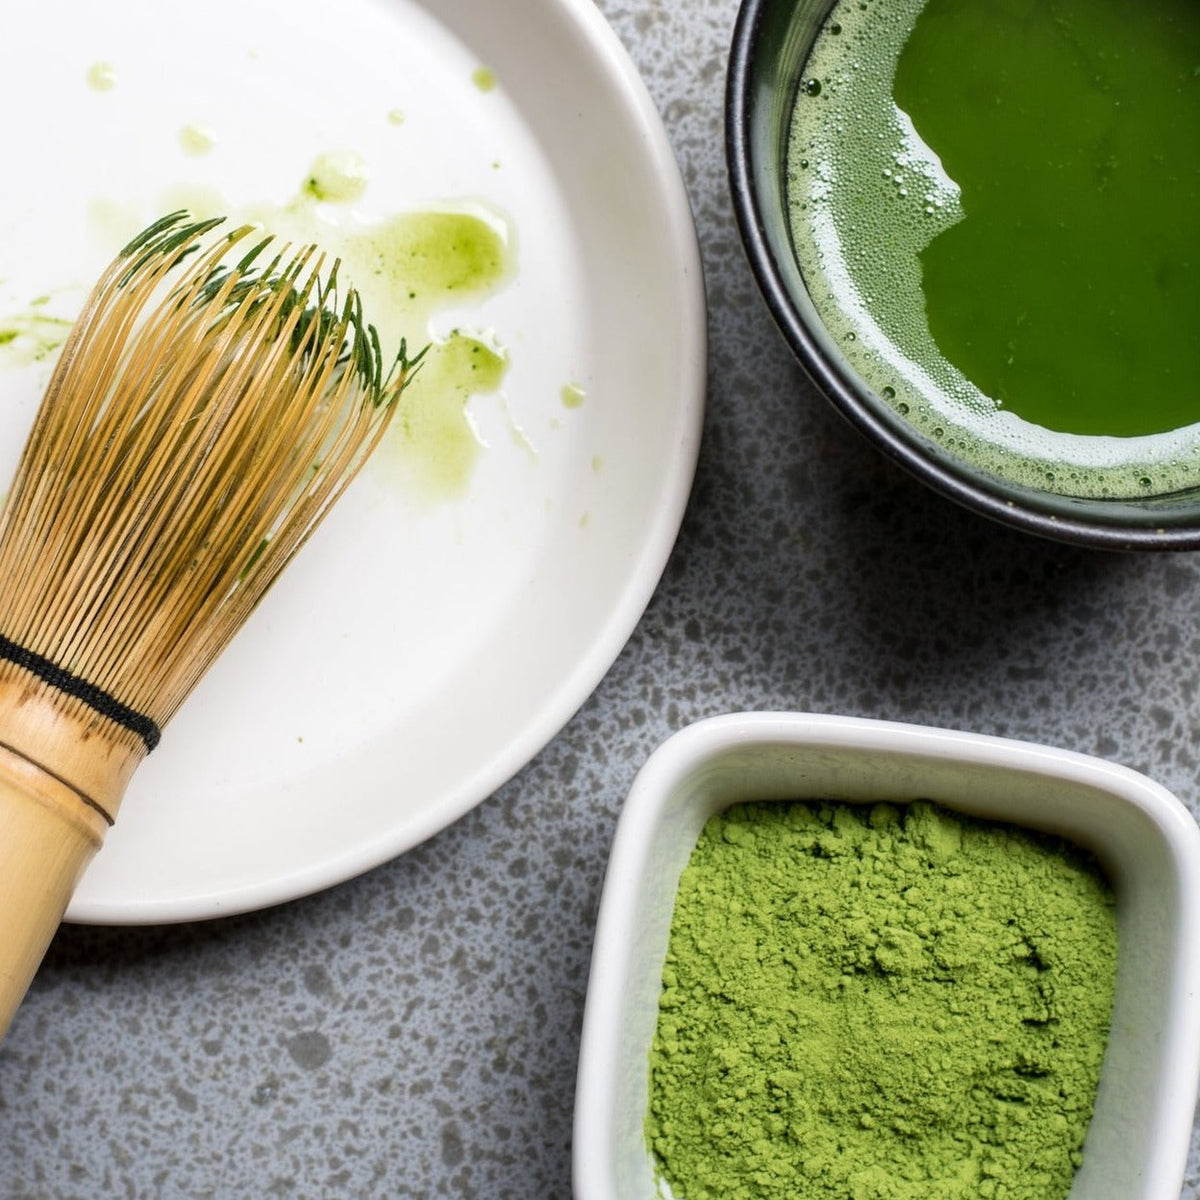 1st Place Winner of the North American Tea Championships, Sipping Streams' Imperial Matcha.